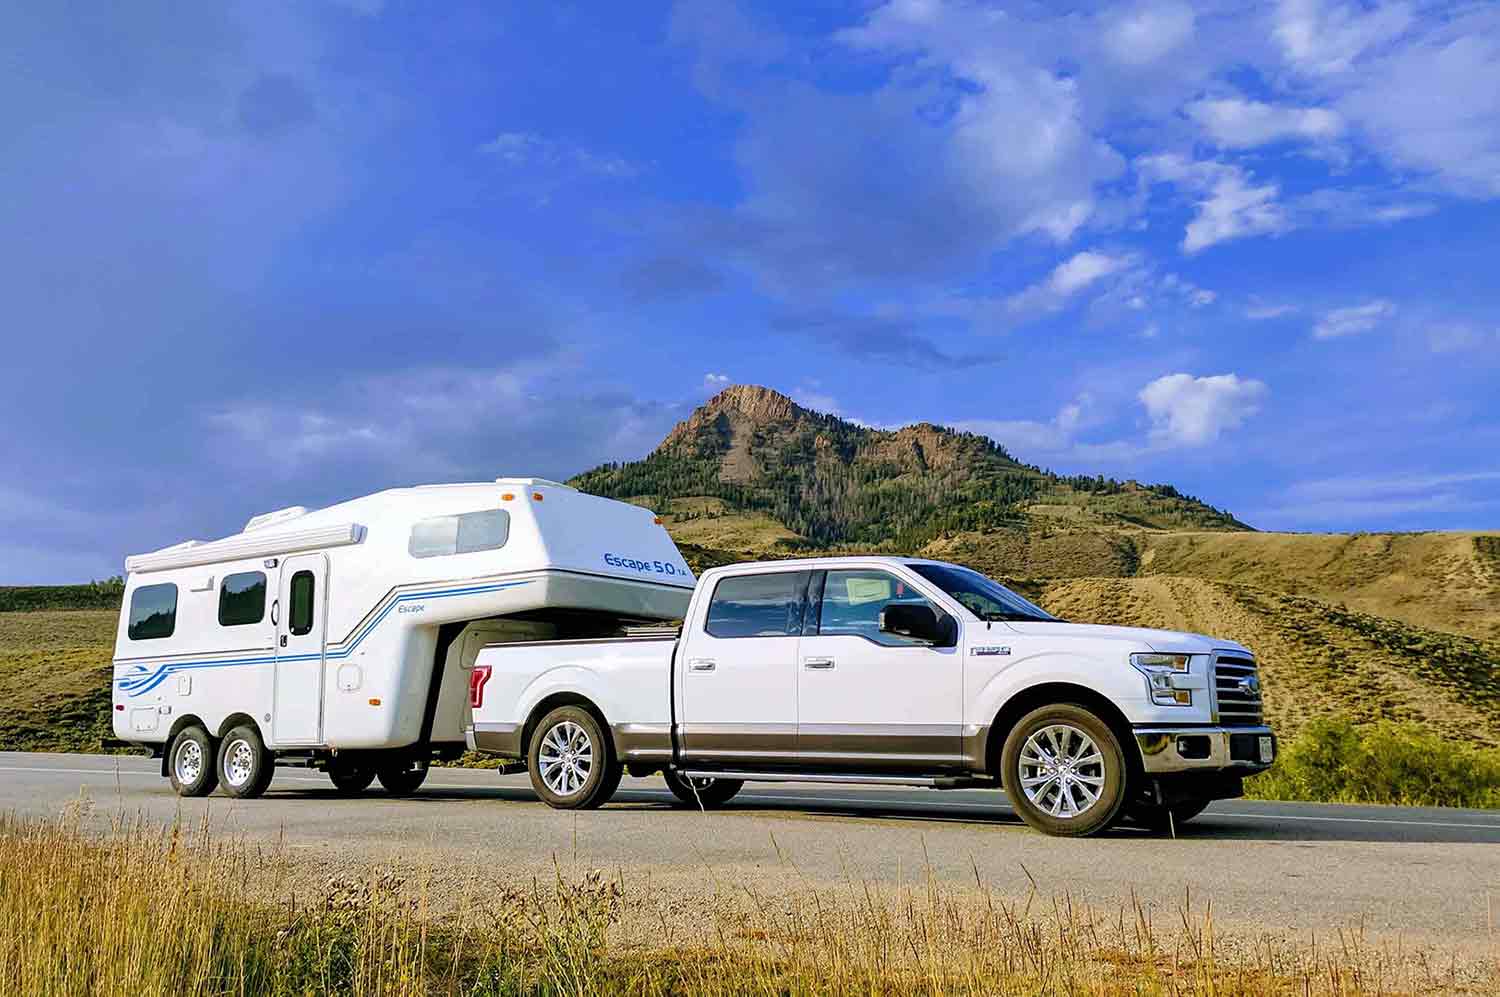 The 10 Best Small 5th Wheel Trailers You Can Buy Right Now - RV Talk How Much Does It Cost To Move A Fifth Wheel